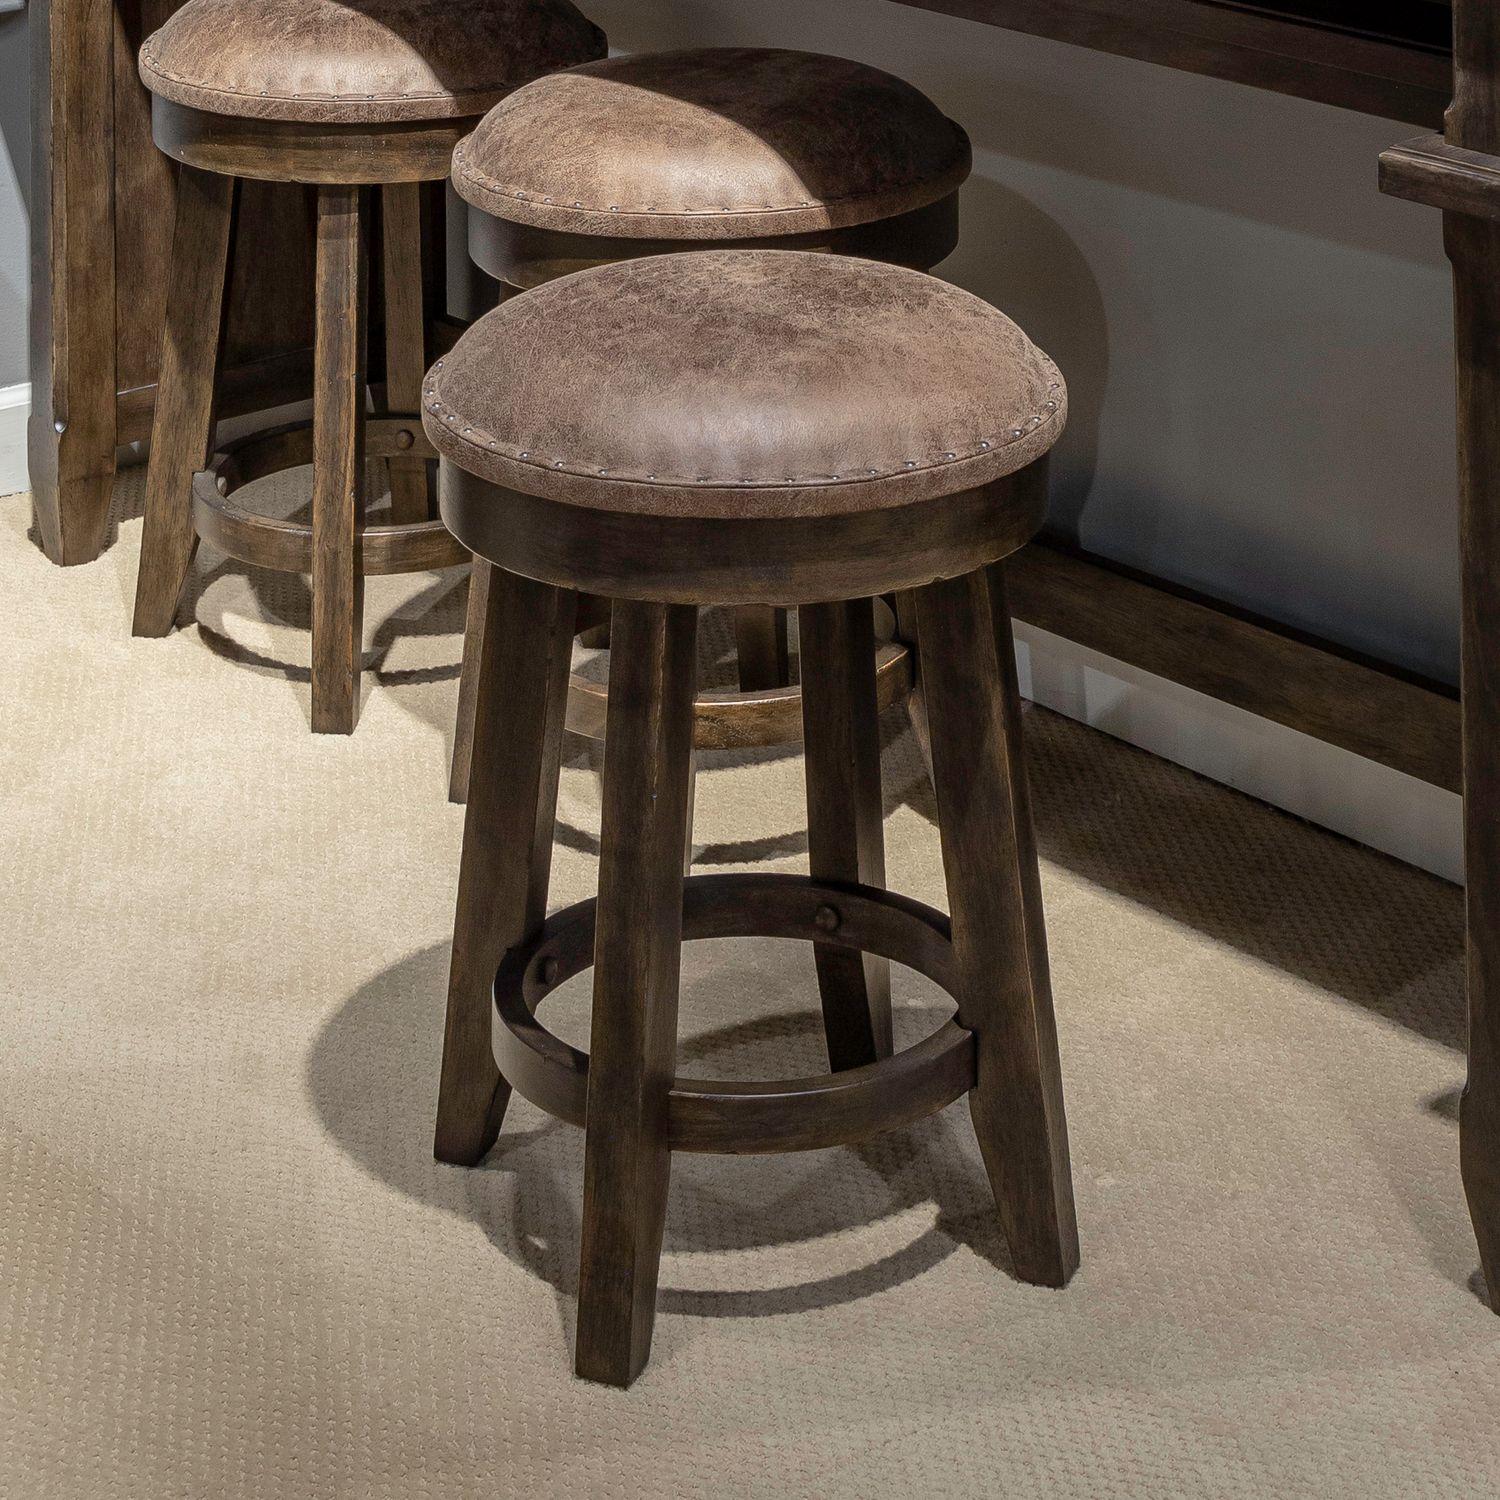 Transitional Bar Stool Paradise Valley (297-OT) 297-OT9001 in Brown Fabric